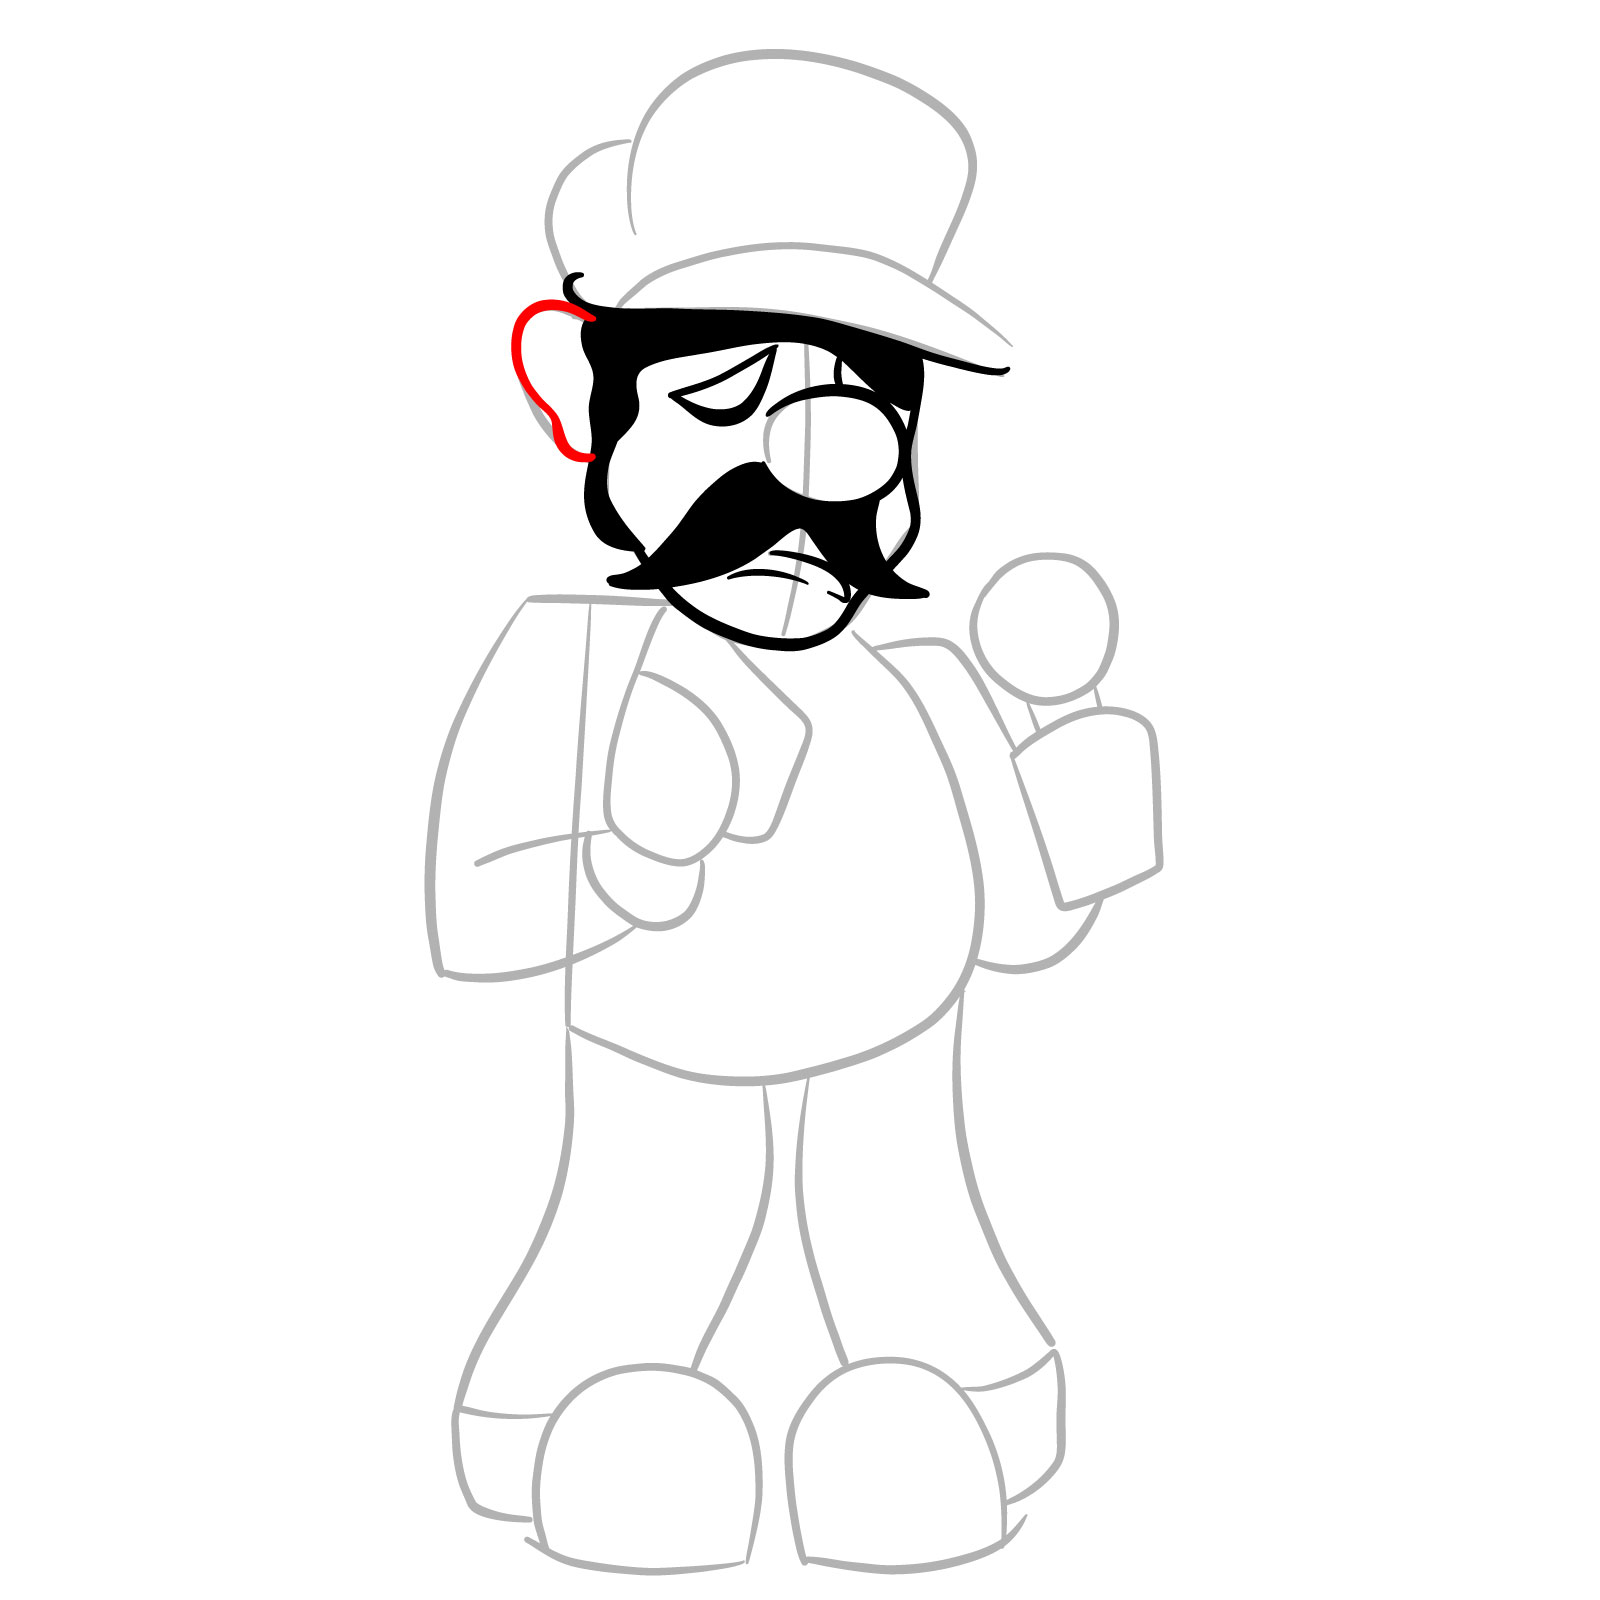 How to draw Beta Luigi from FNF - step 10